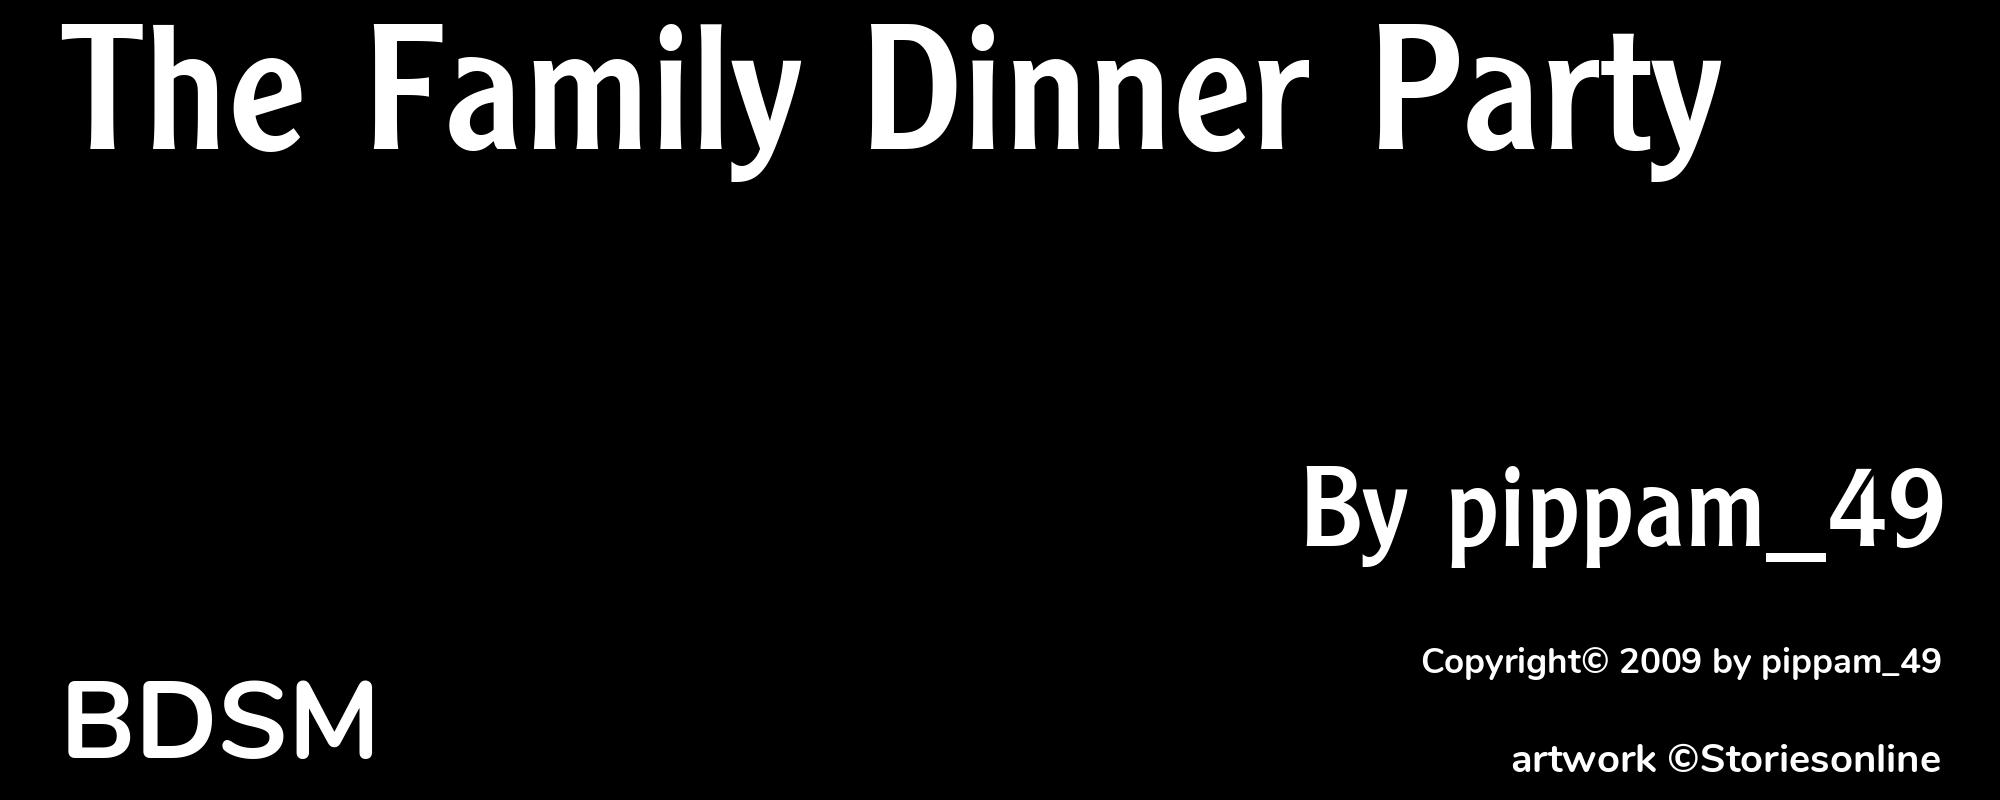 The Family Dinner Party - Cover